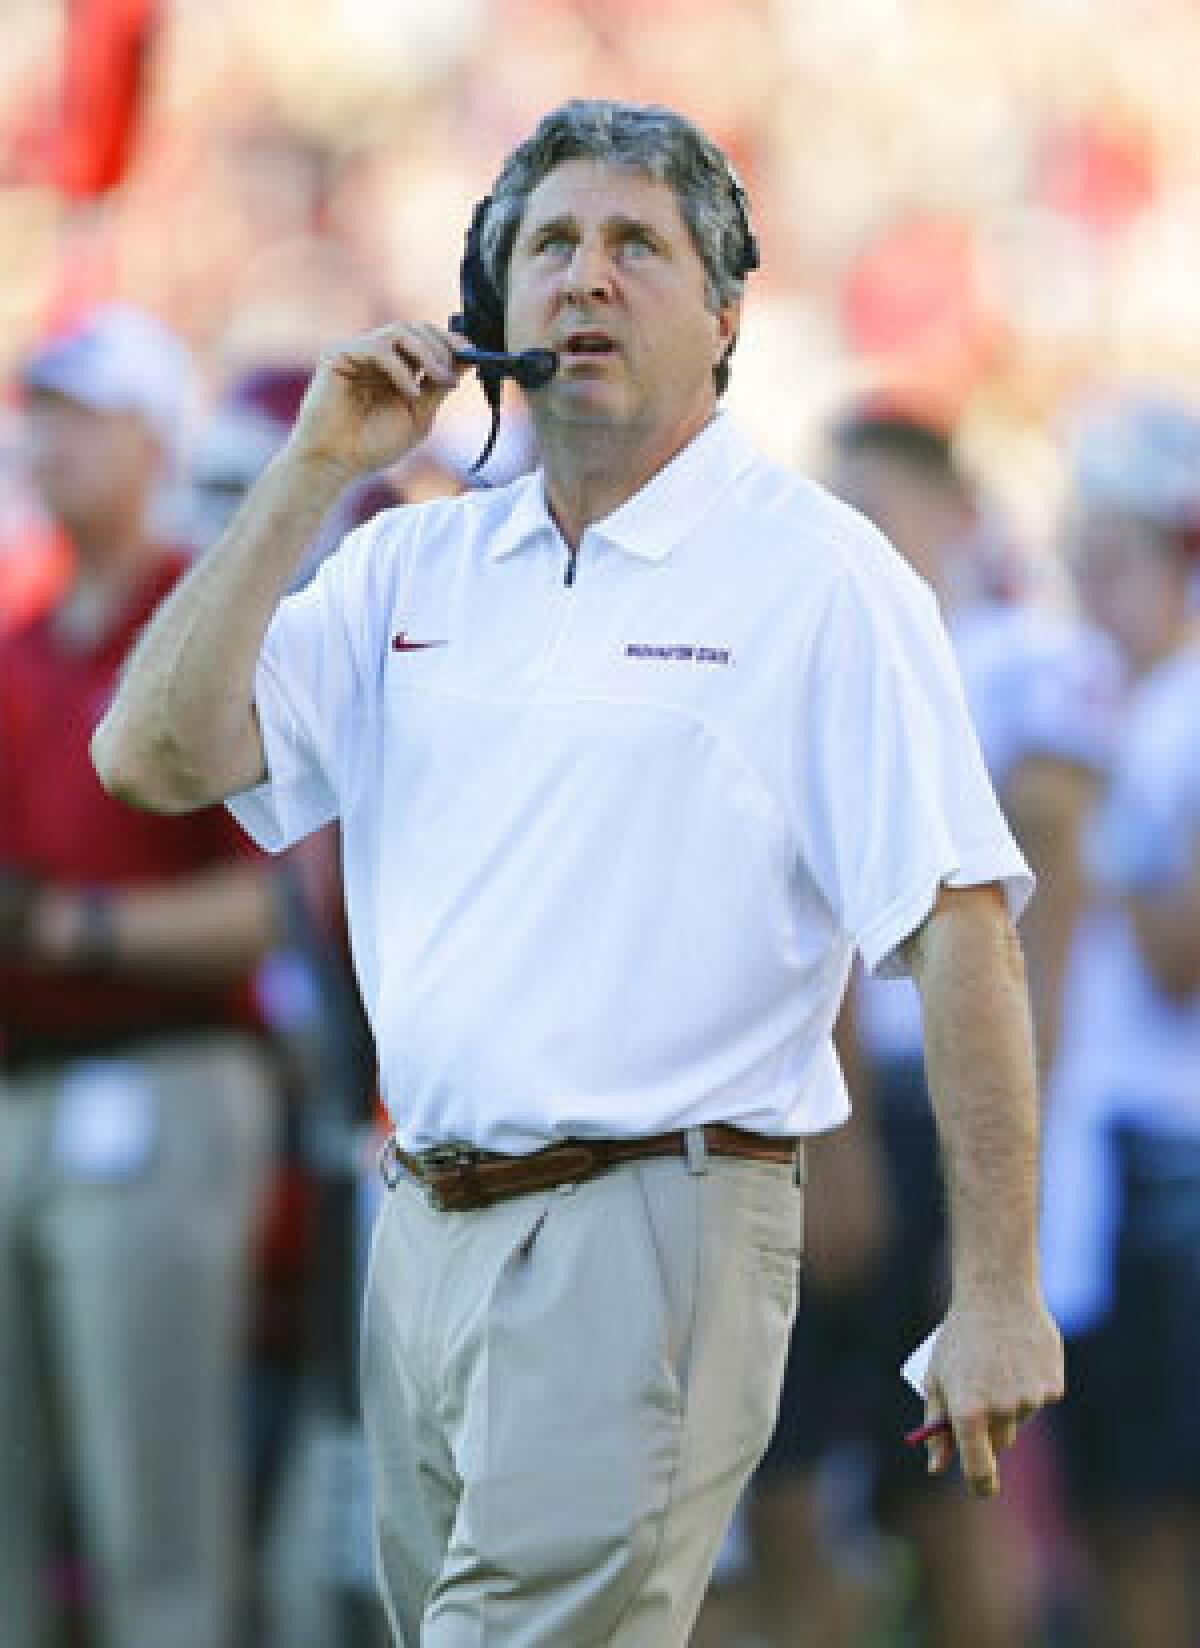 Mike Leach says the Pac-12's worst teams are better than the SEC's worst.